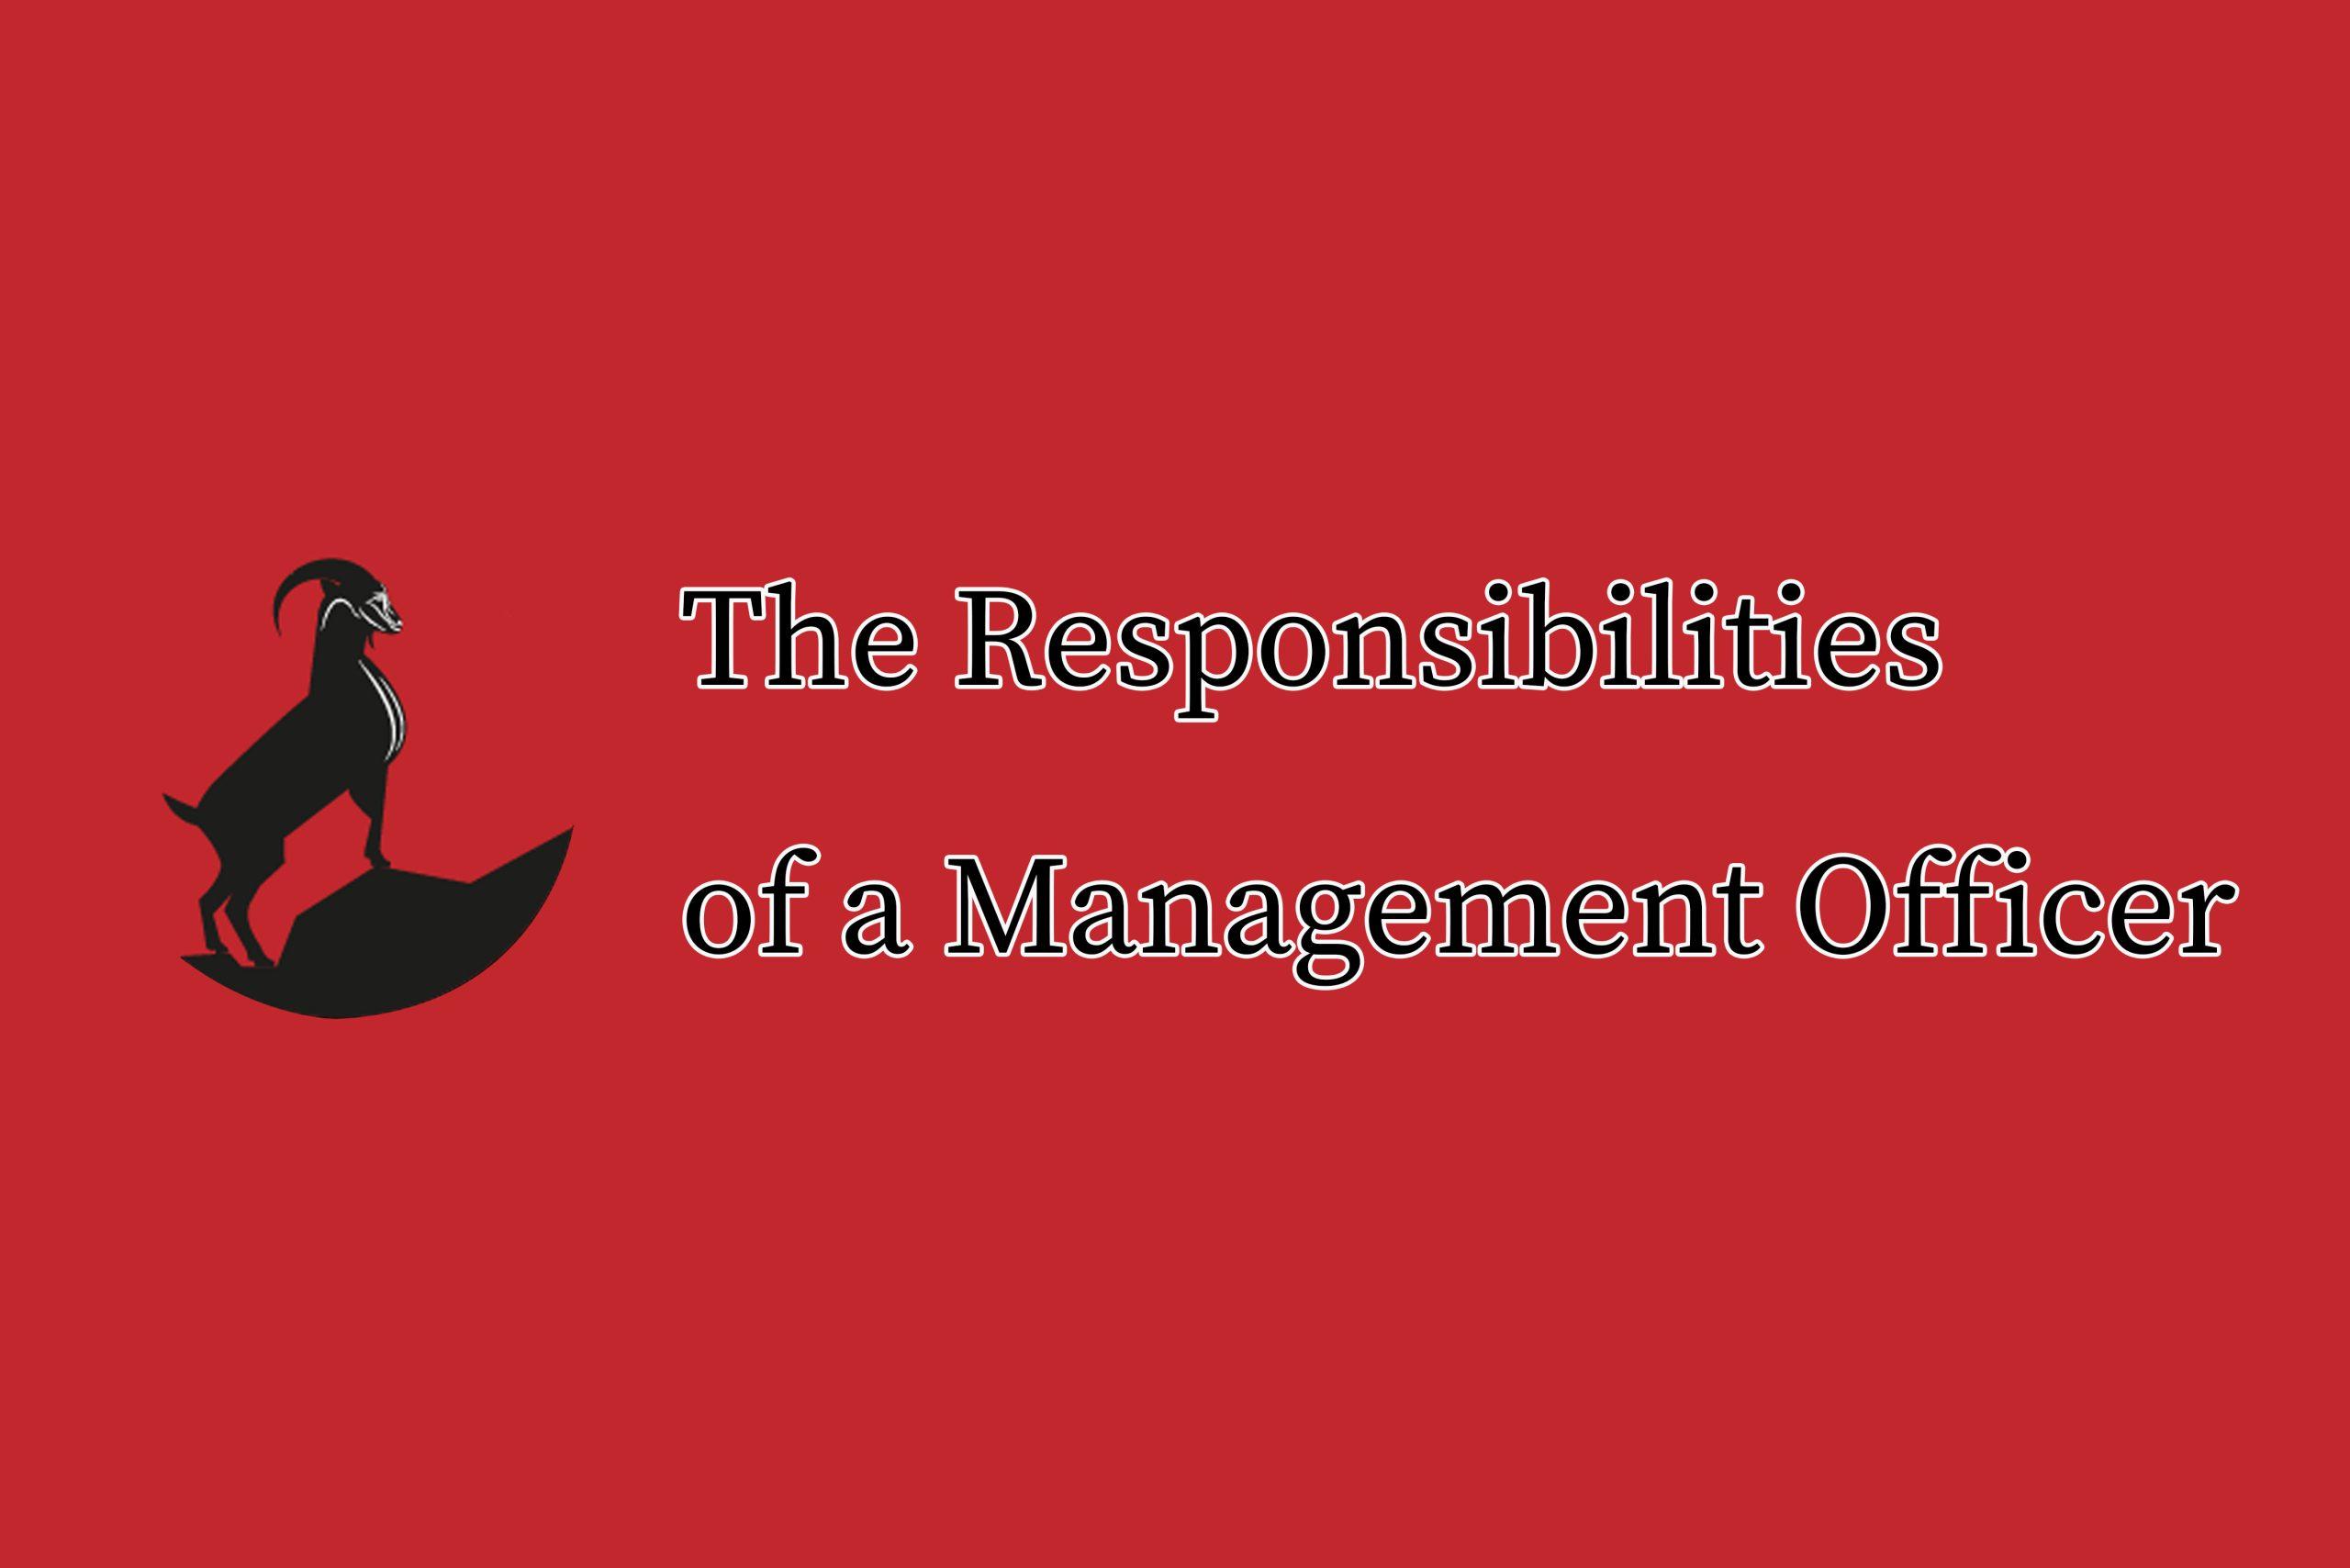 The Responsibilities of a Management Officer